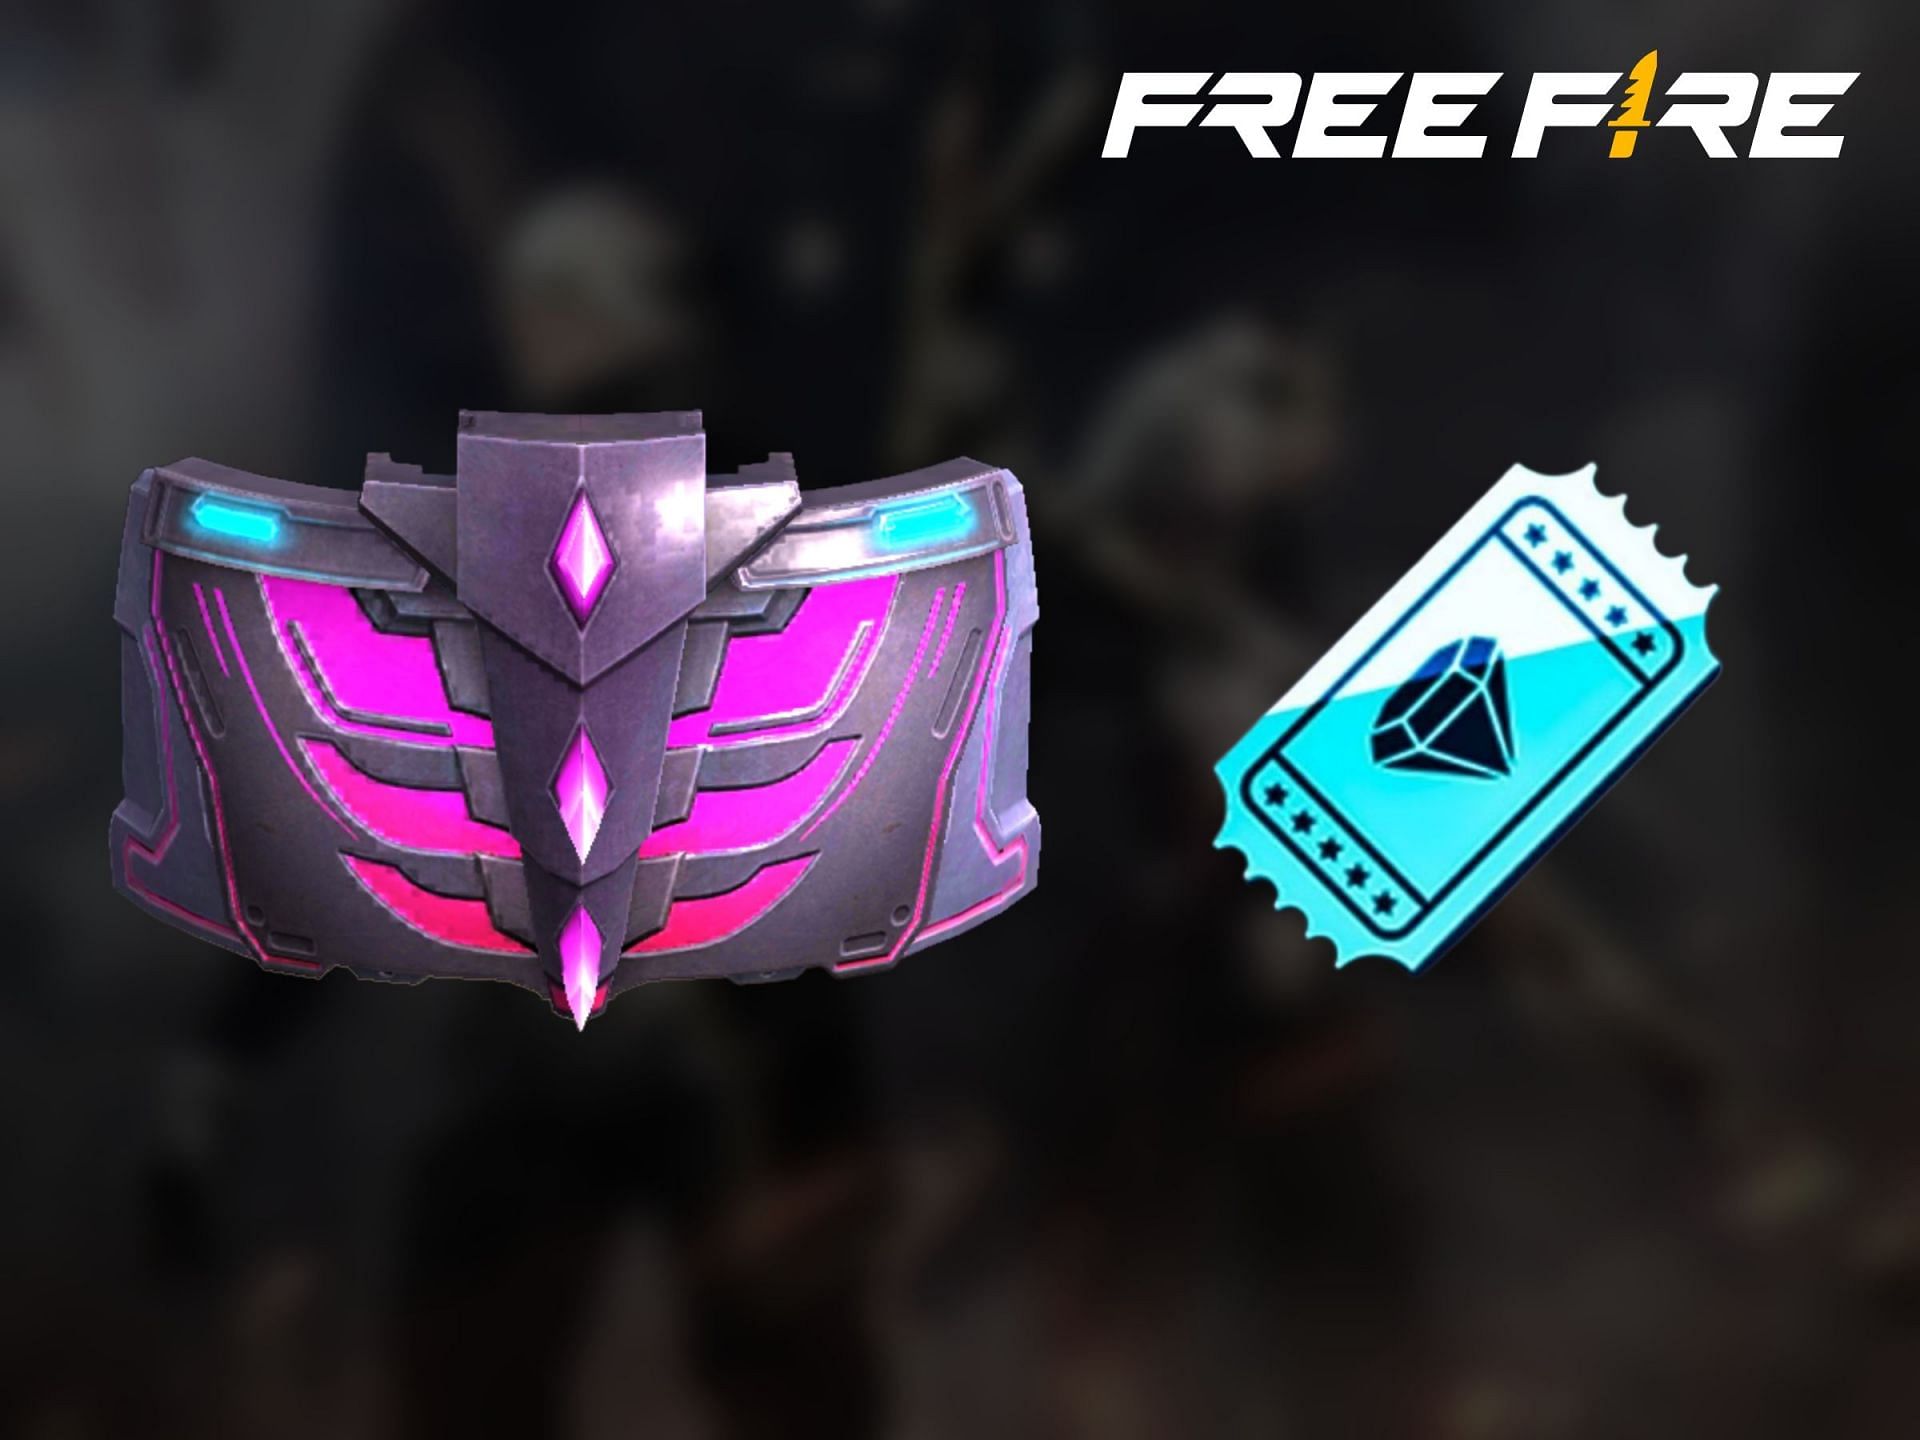 Free Fire redeem codes can offer you free gloo wall skins and more rewards (Image via Sportskeeda)